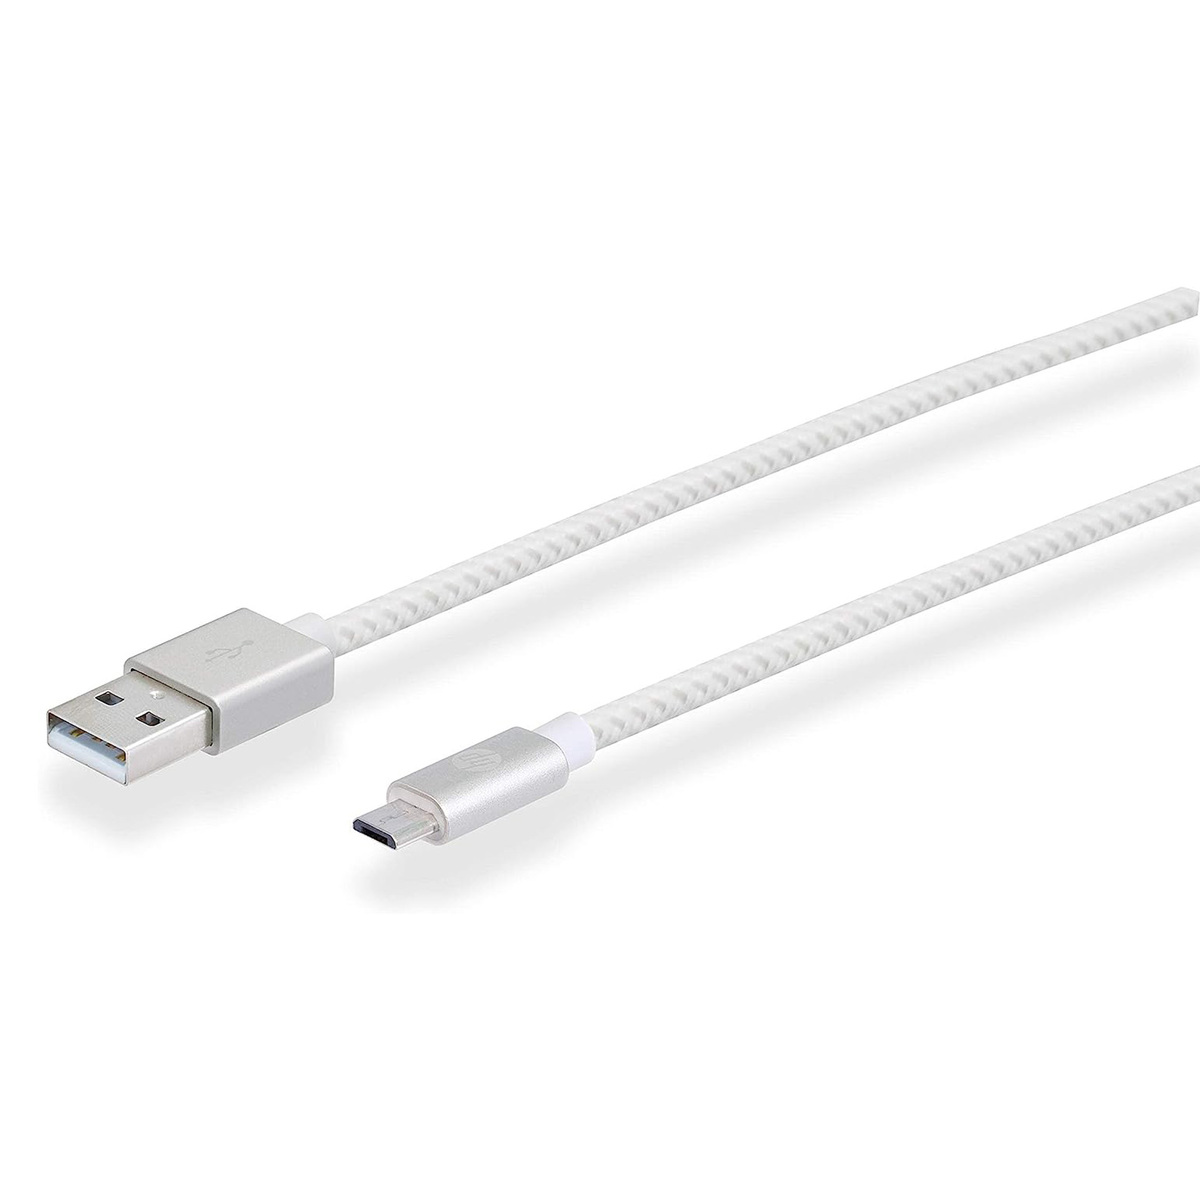 HP Pro Micro USB Cable, 1 m, Silver, HP041GBSLV1TW